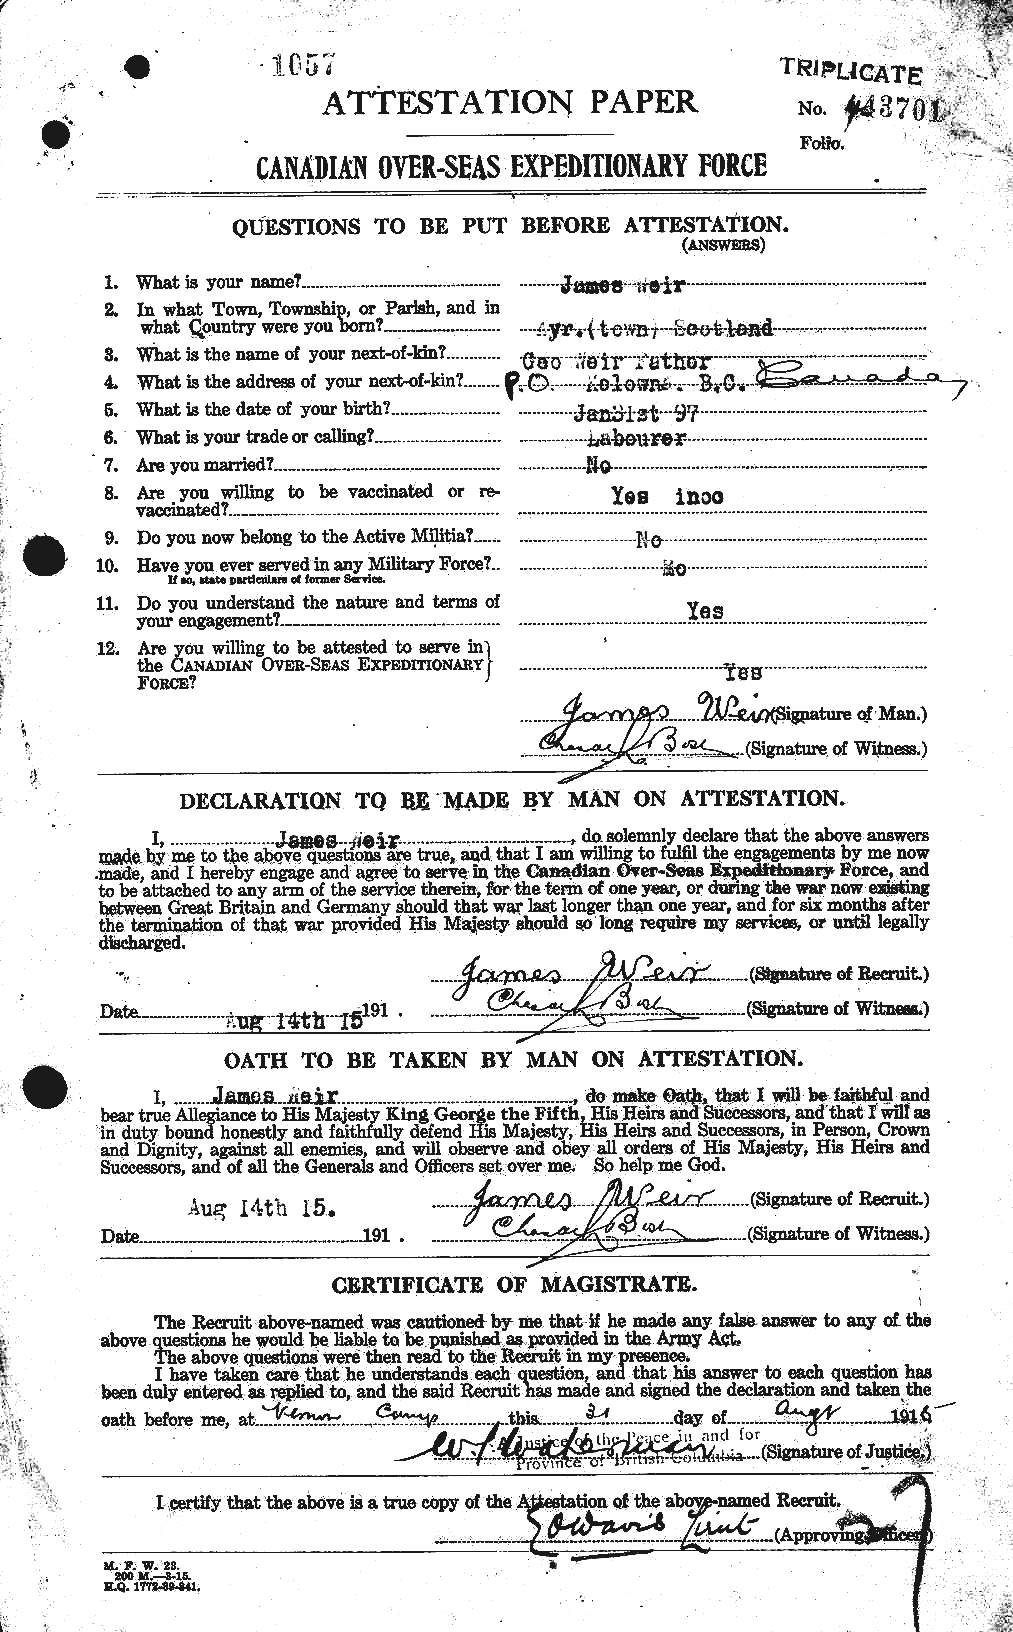 Personnel Records of the First World War - CEF 663851a